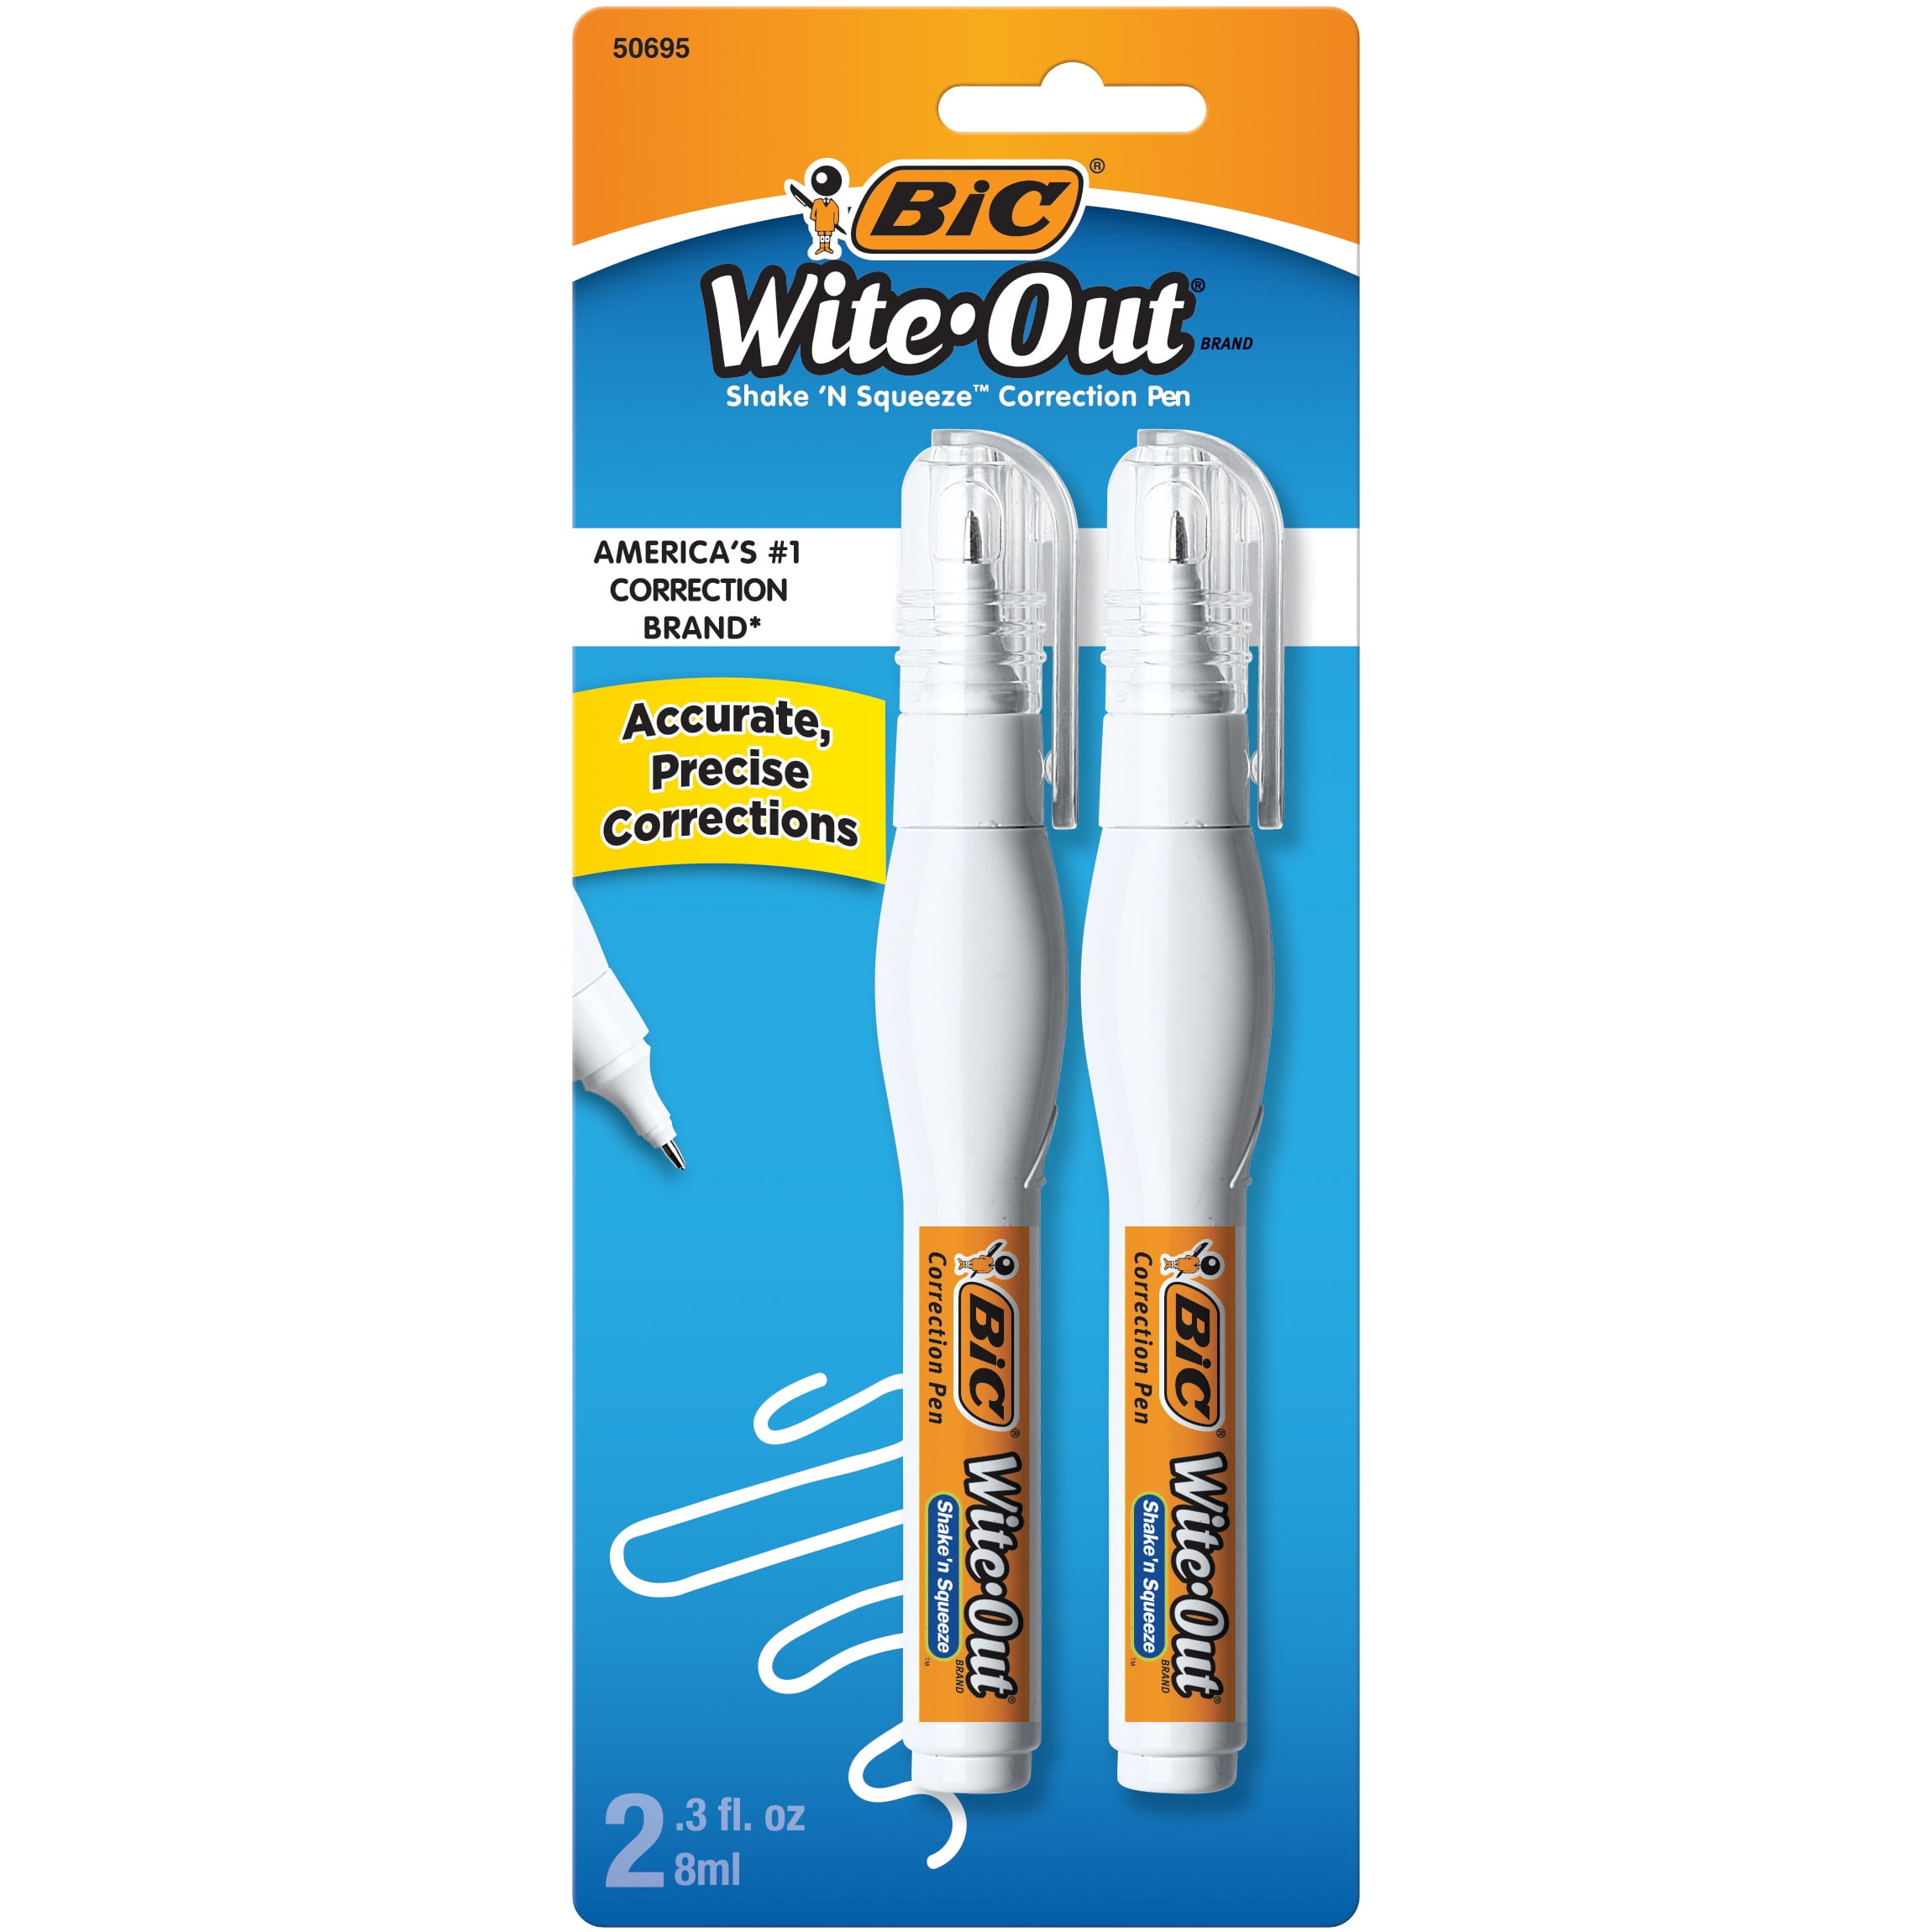 BIC Wite-Out Quick Dry Correction Fluid - 2 pack - white color writeout -  white-out